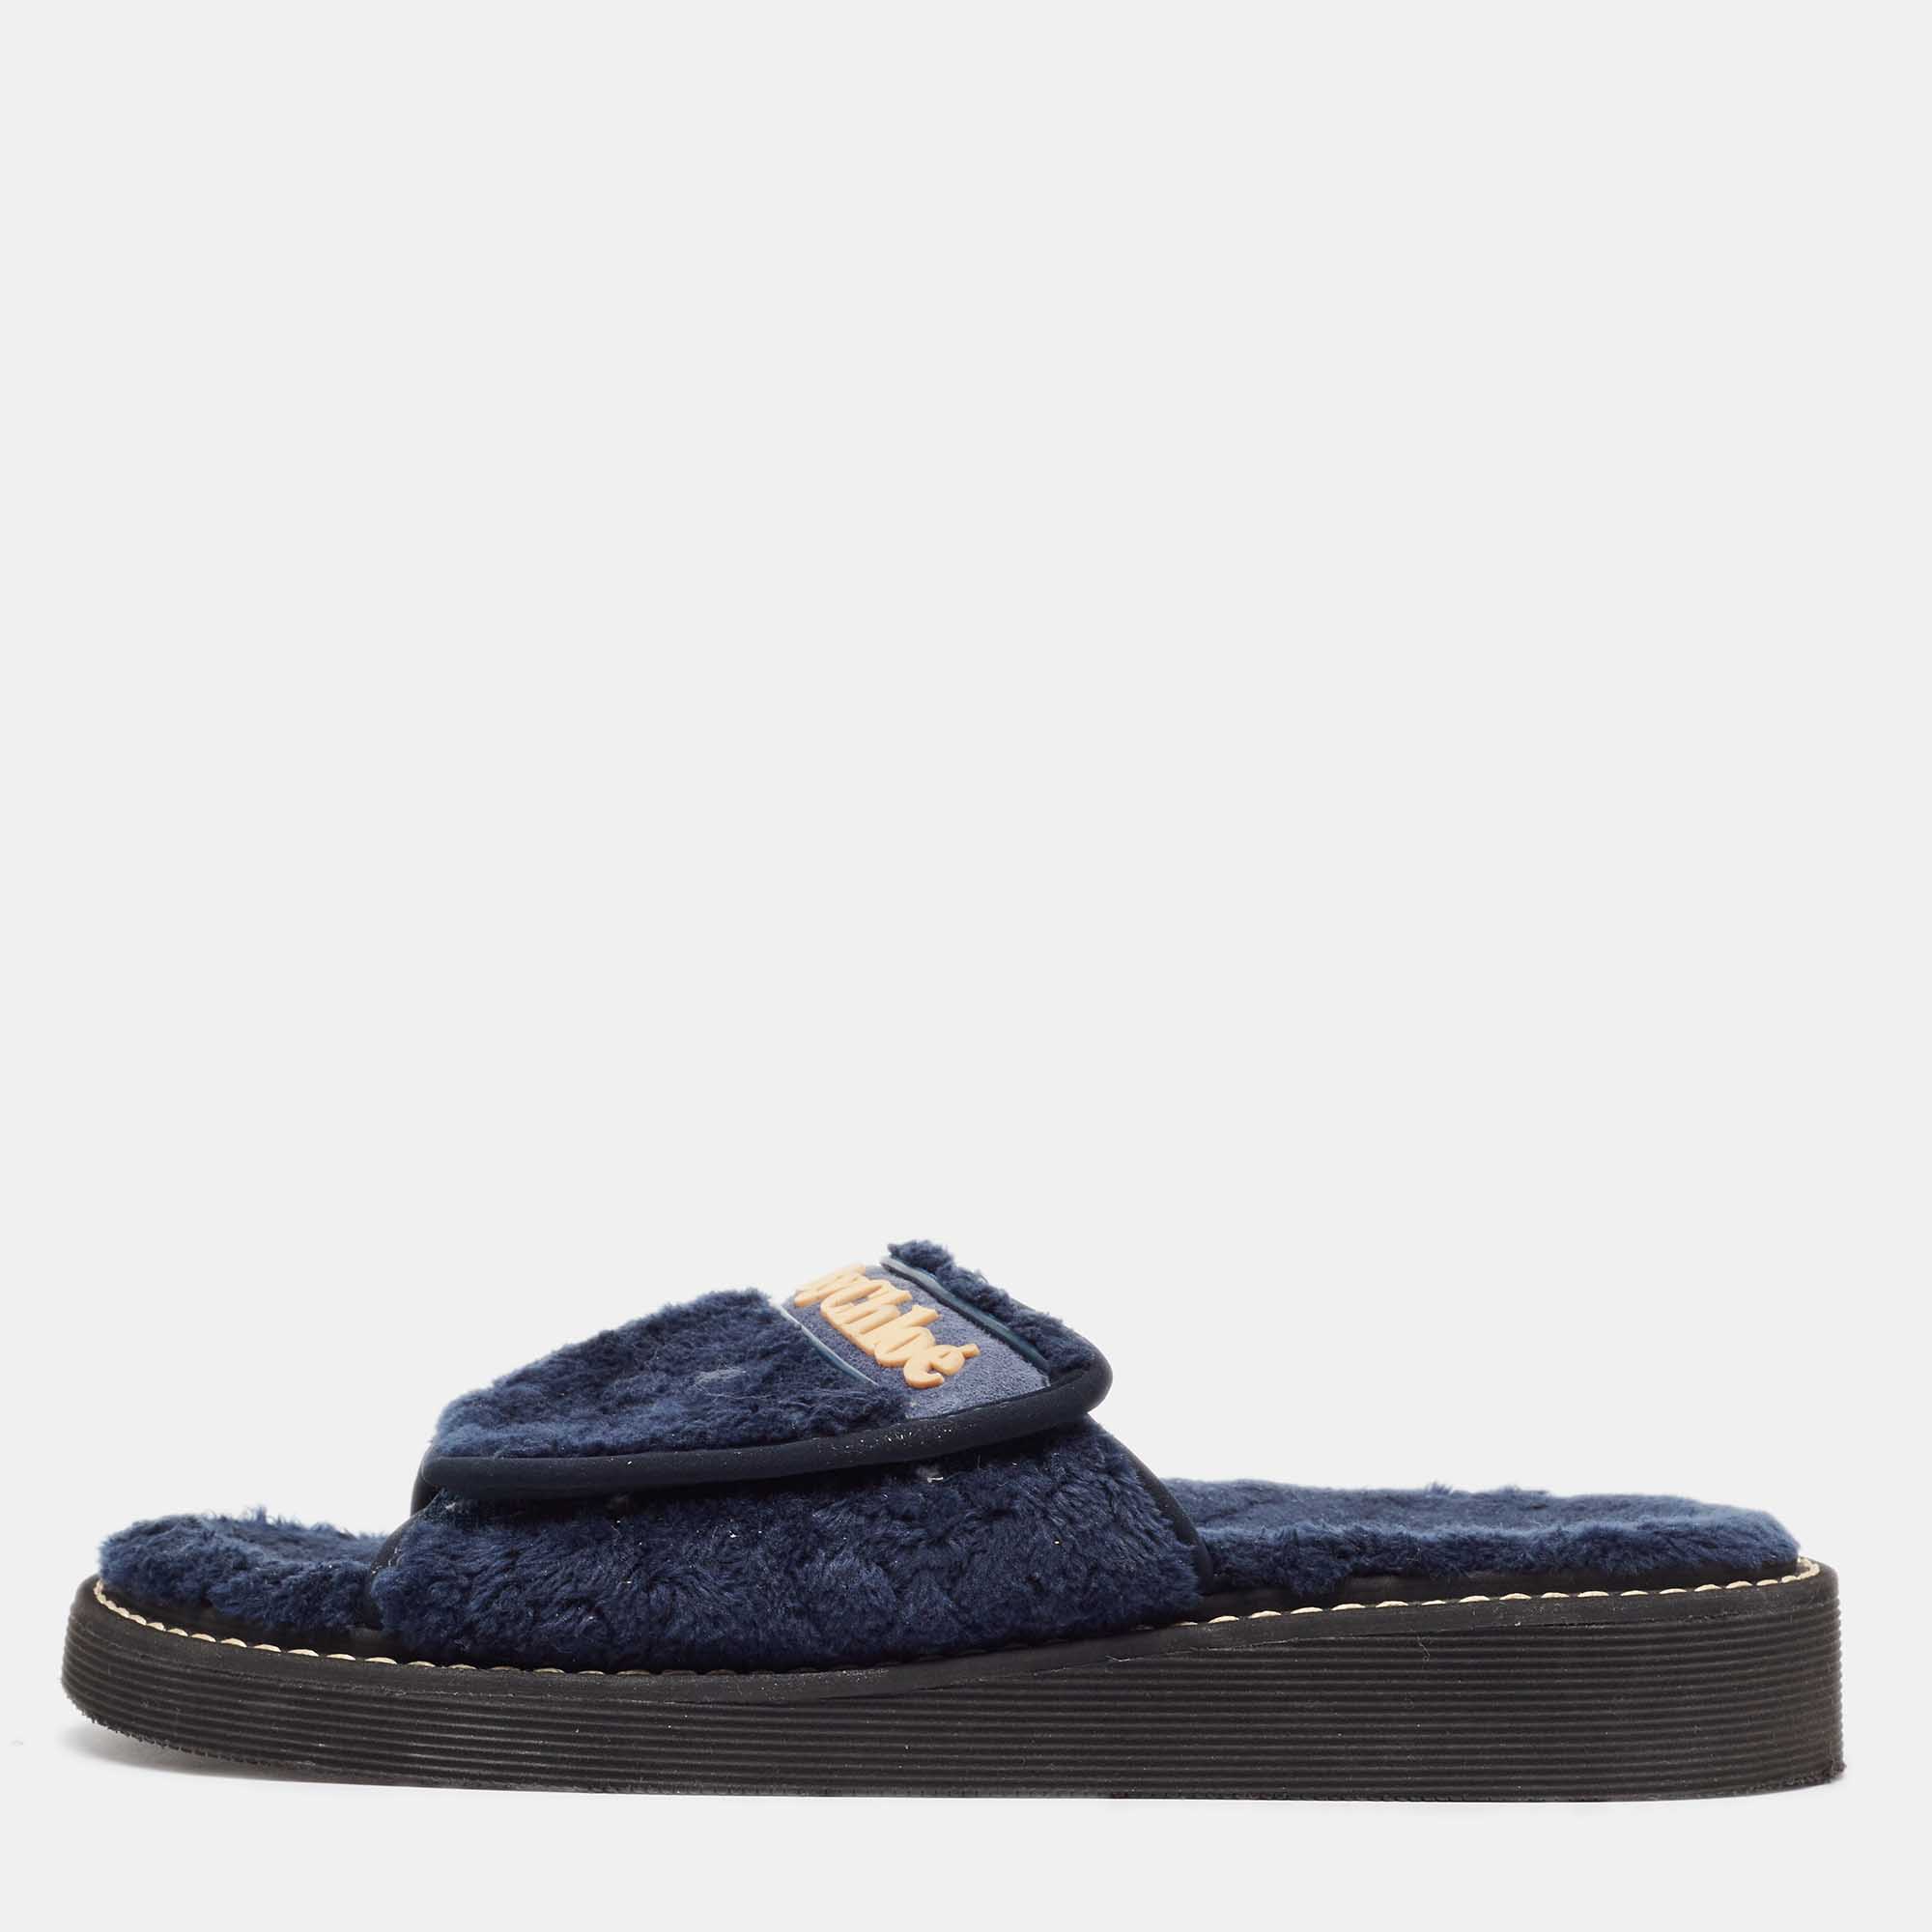 Pre-owned See By Chloé Navy Blue Fur Flat Slides Size 41